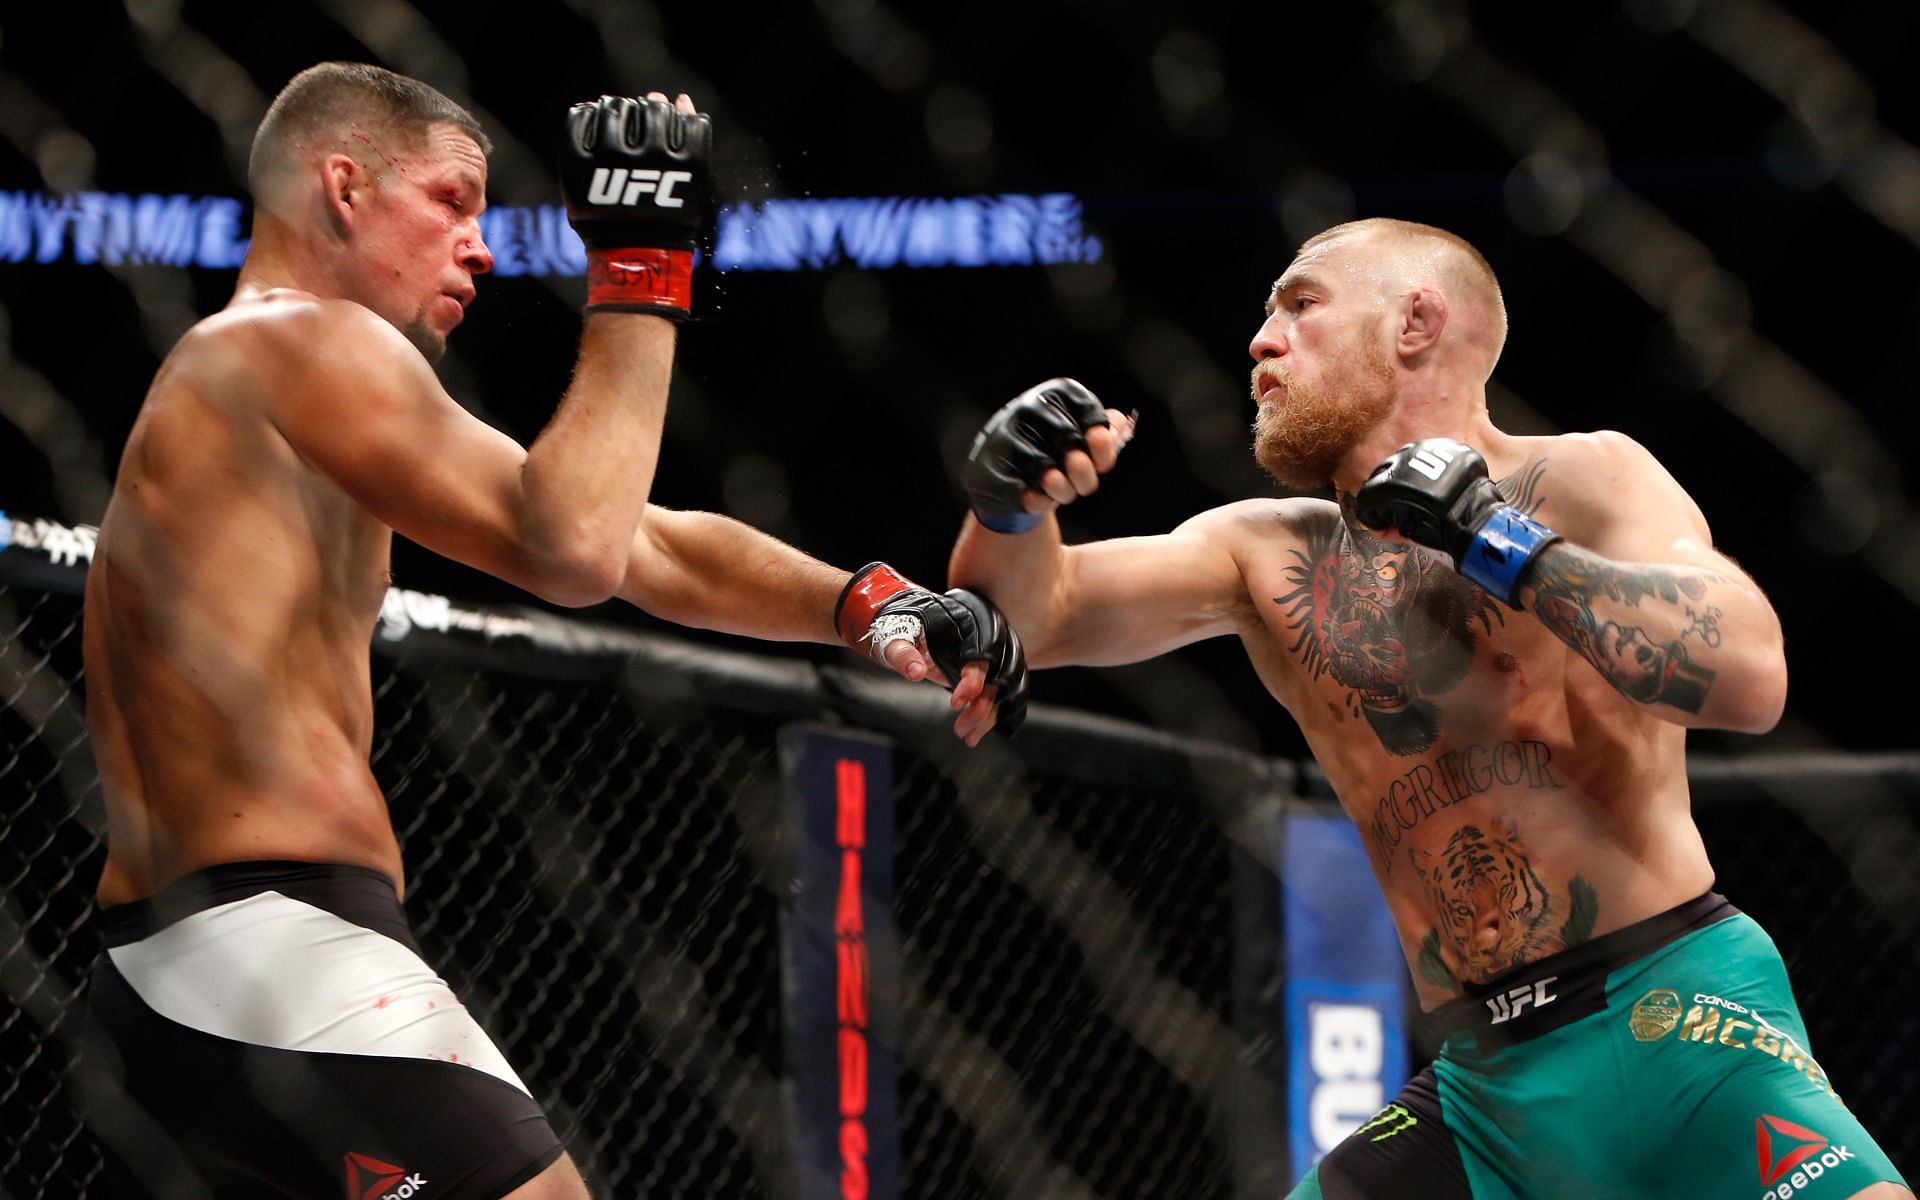 Could we finally see a trilogy bout between Conor McGregor and Nate Diaz in the near future?